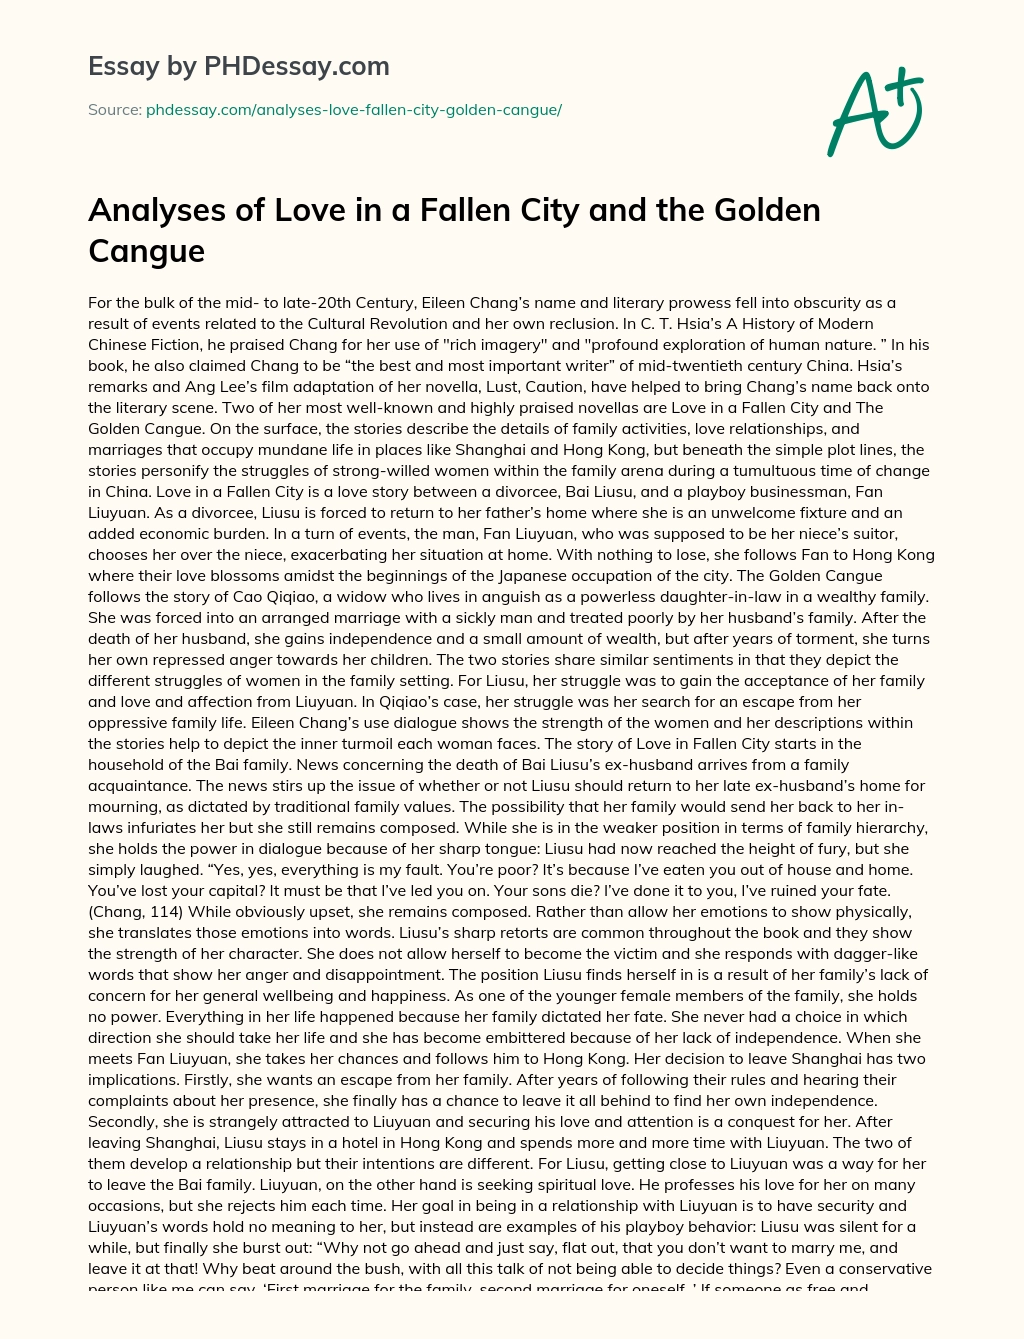 Analyses of Love in a Fallen City and the Golden Cangue essay